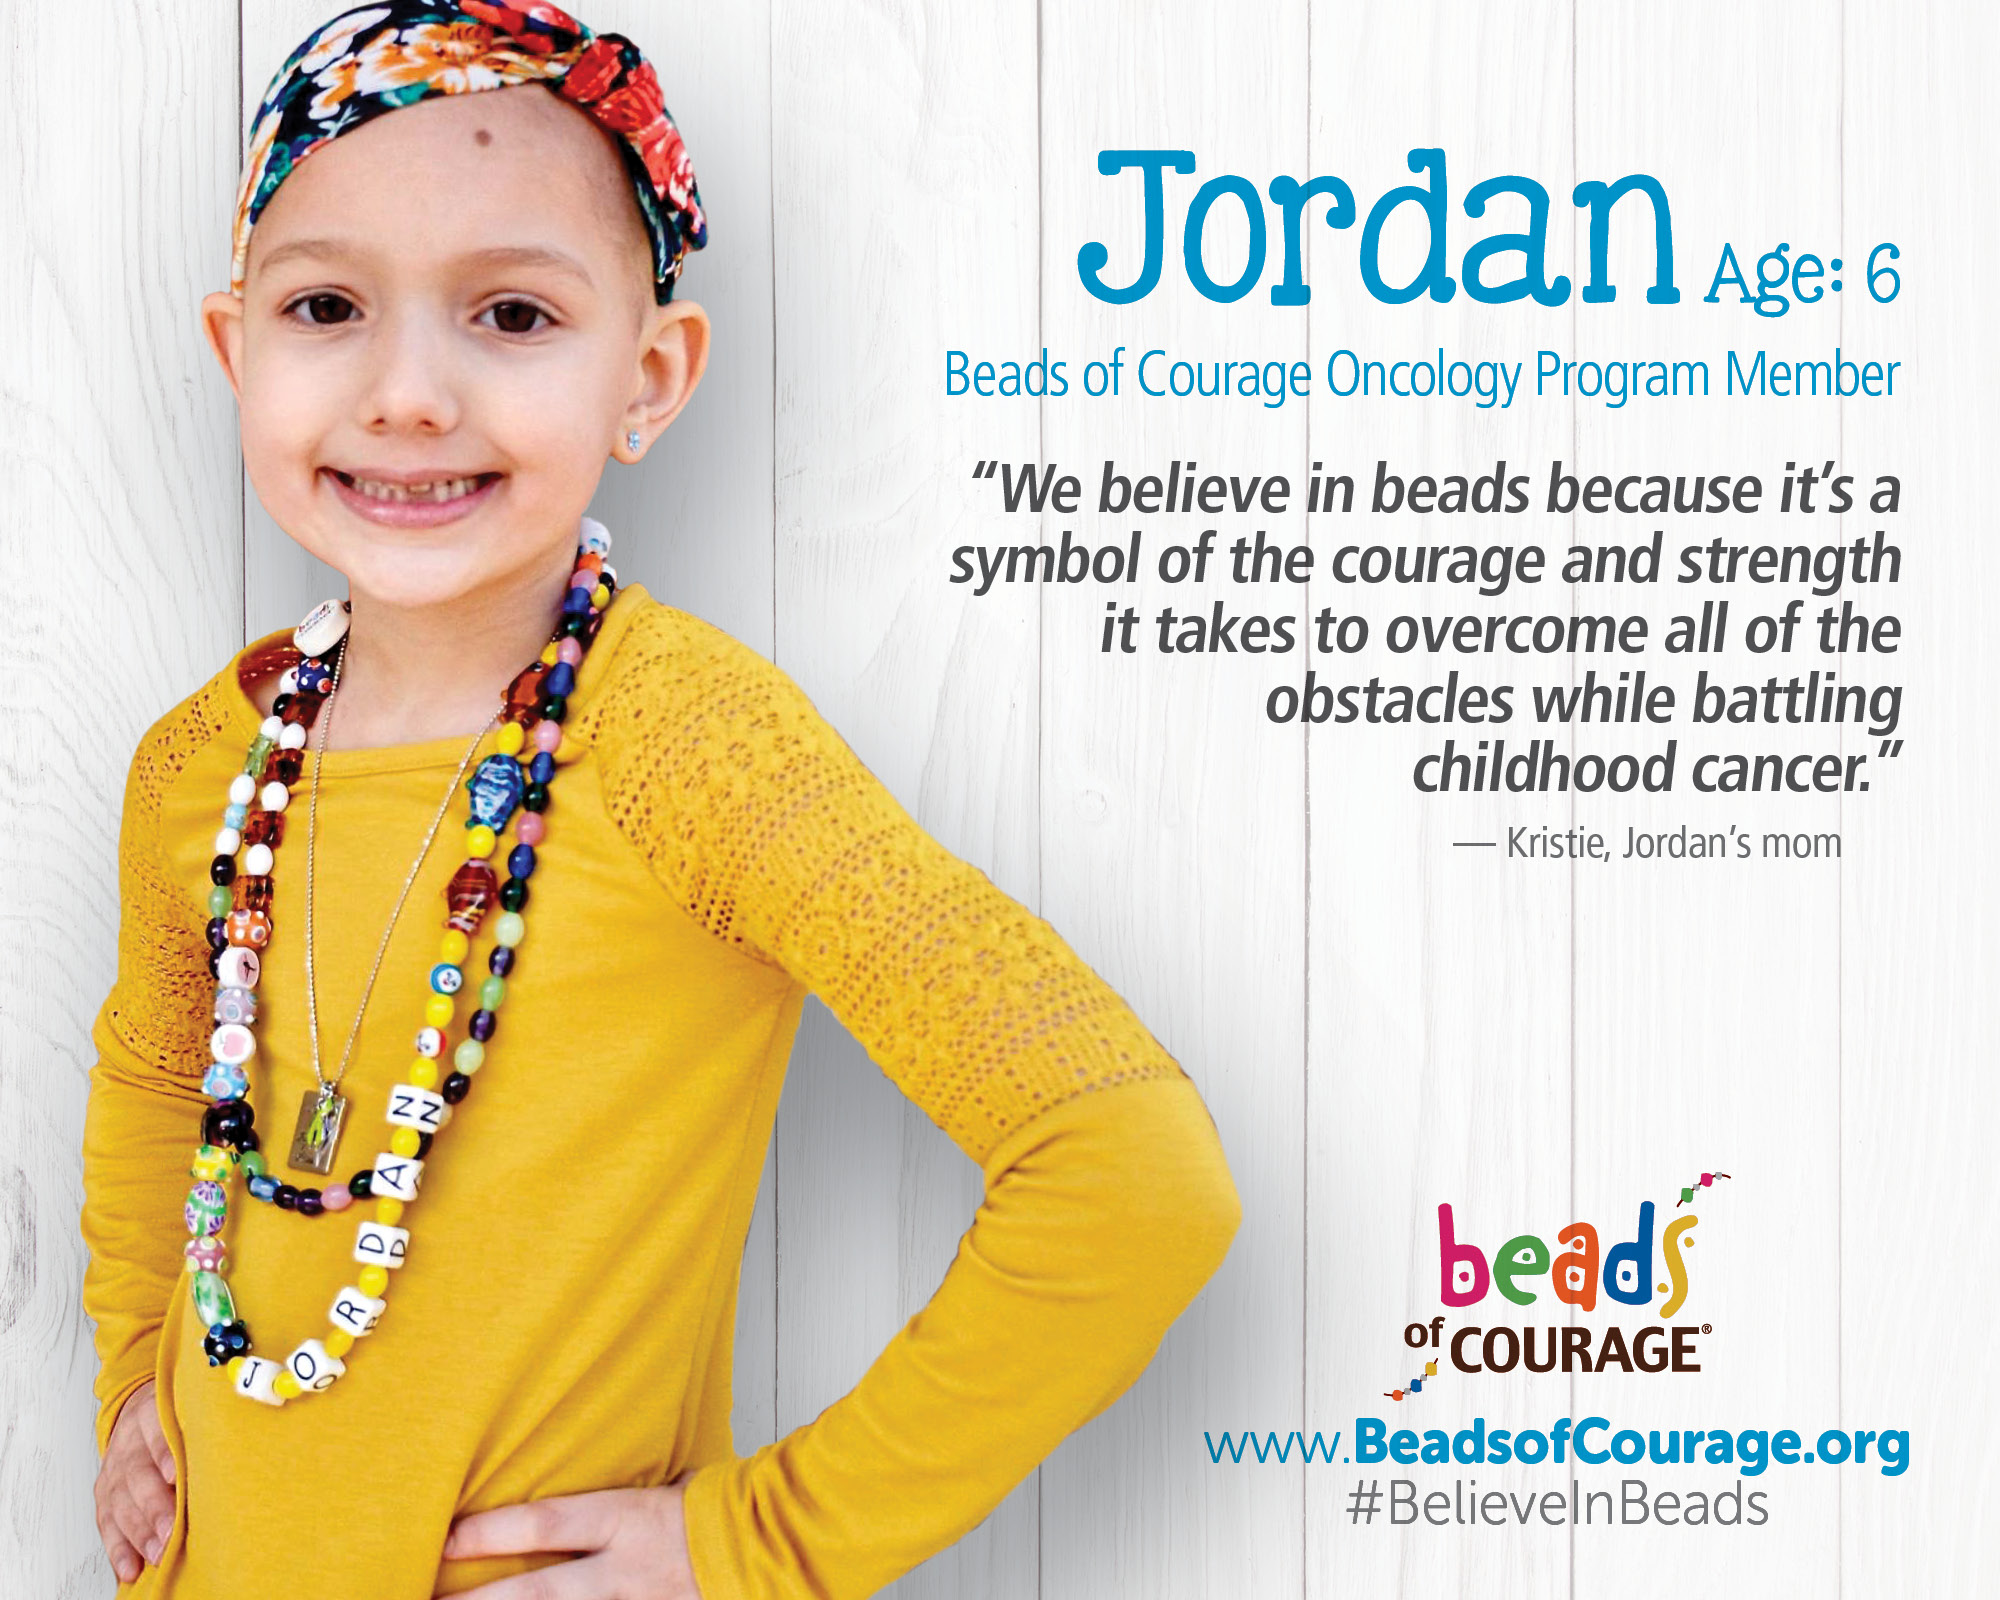 Flagship program, Beads of Courage